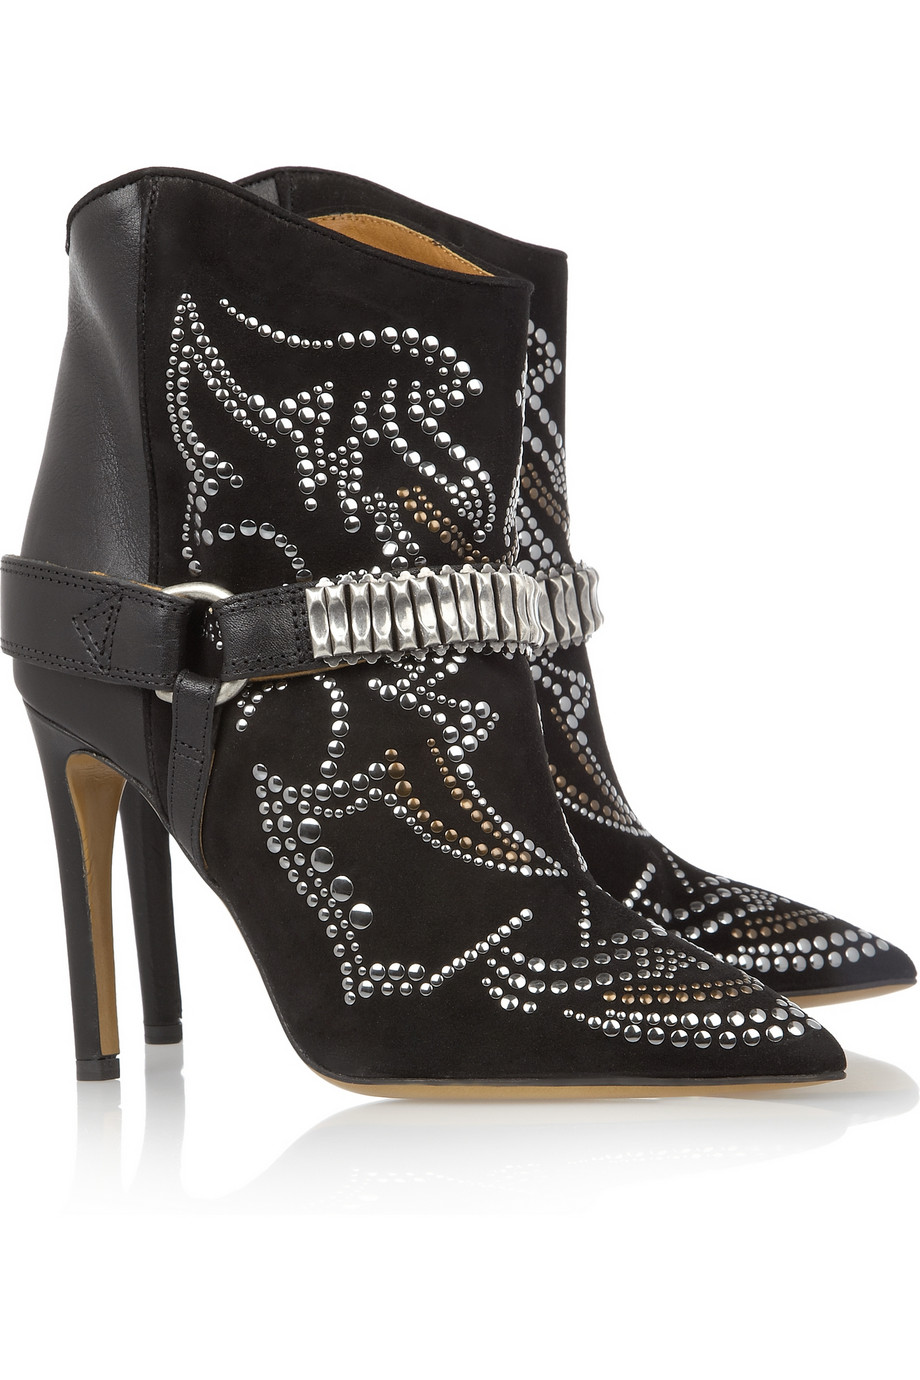 Isabel Marant Milwauke Studded Suede and Leather Ankle Boots in Black - Lyst